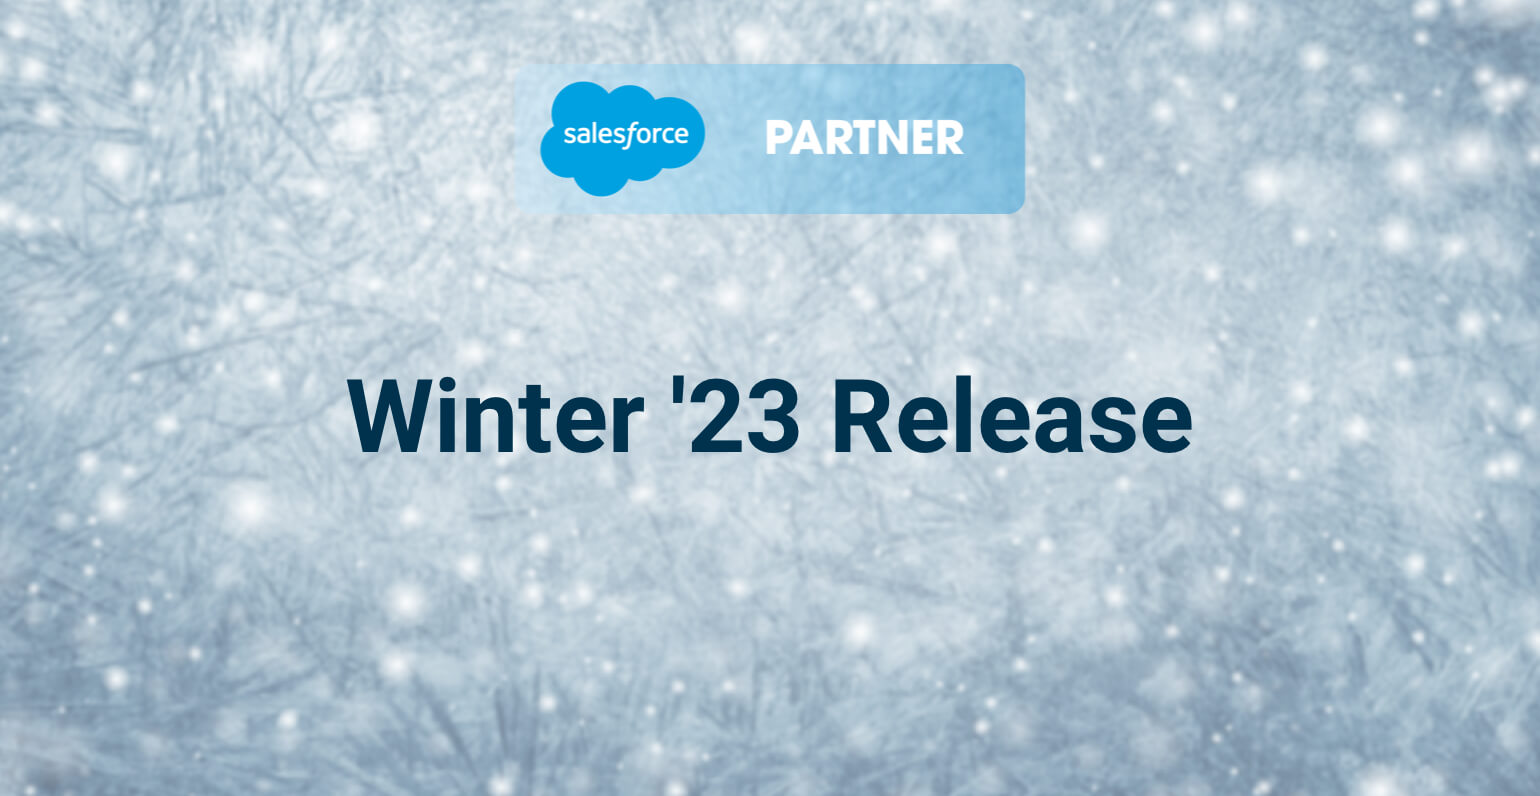 Salesforce Winter ’23 Release: Product Updates, New Features, and Need to Knows